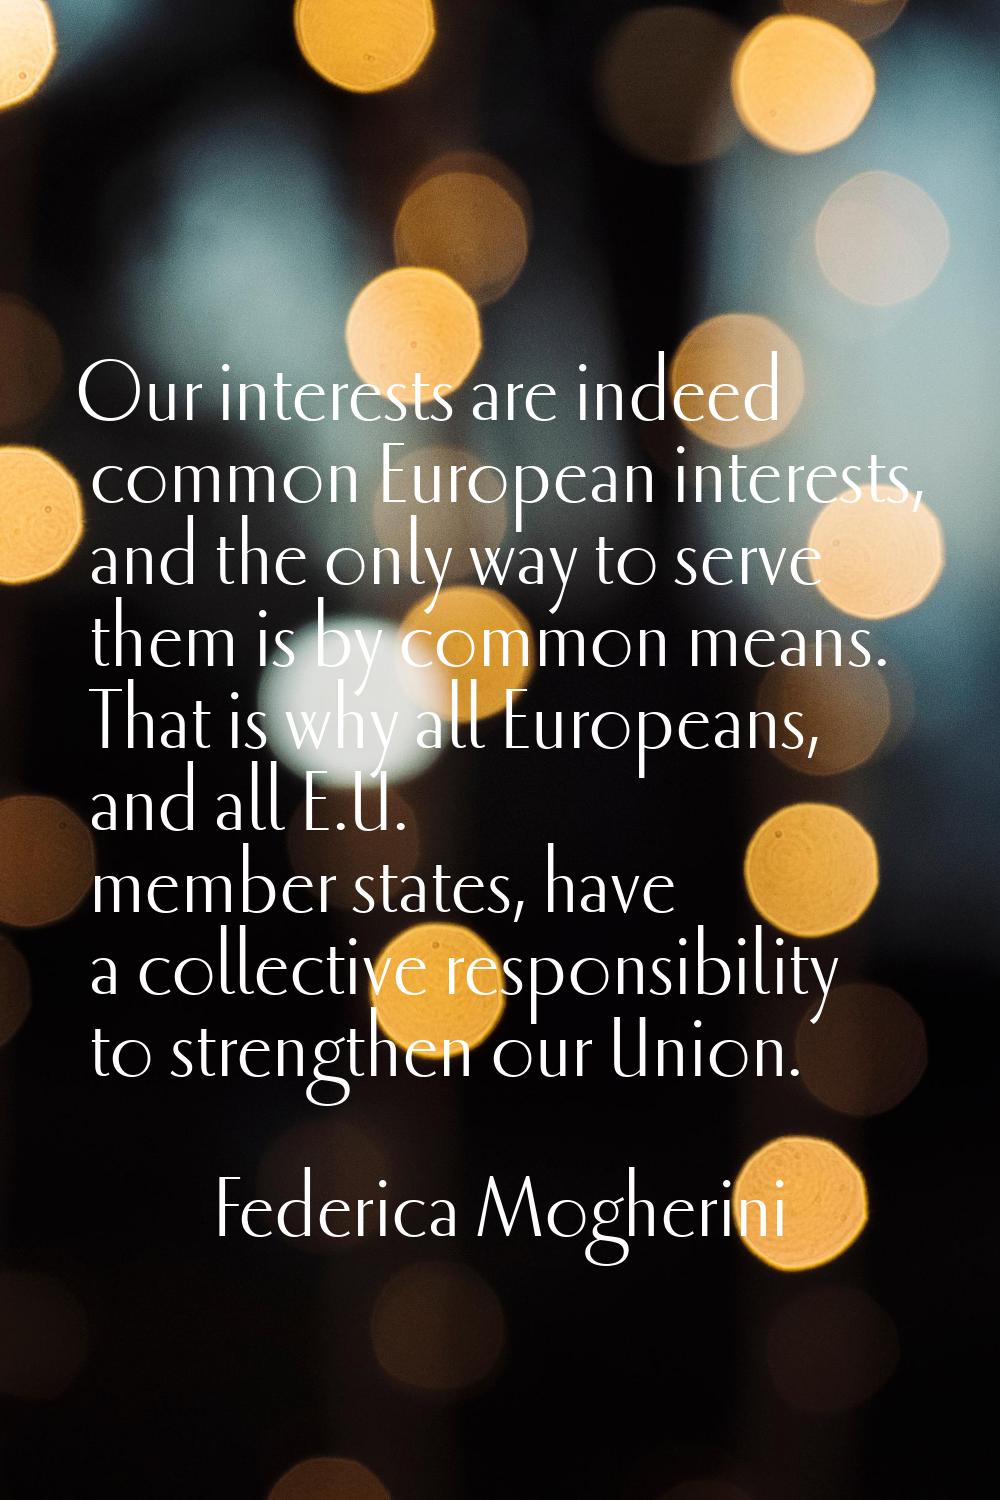 Our interests are indeed common European interests, and the only way to serve them is by common mea